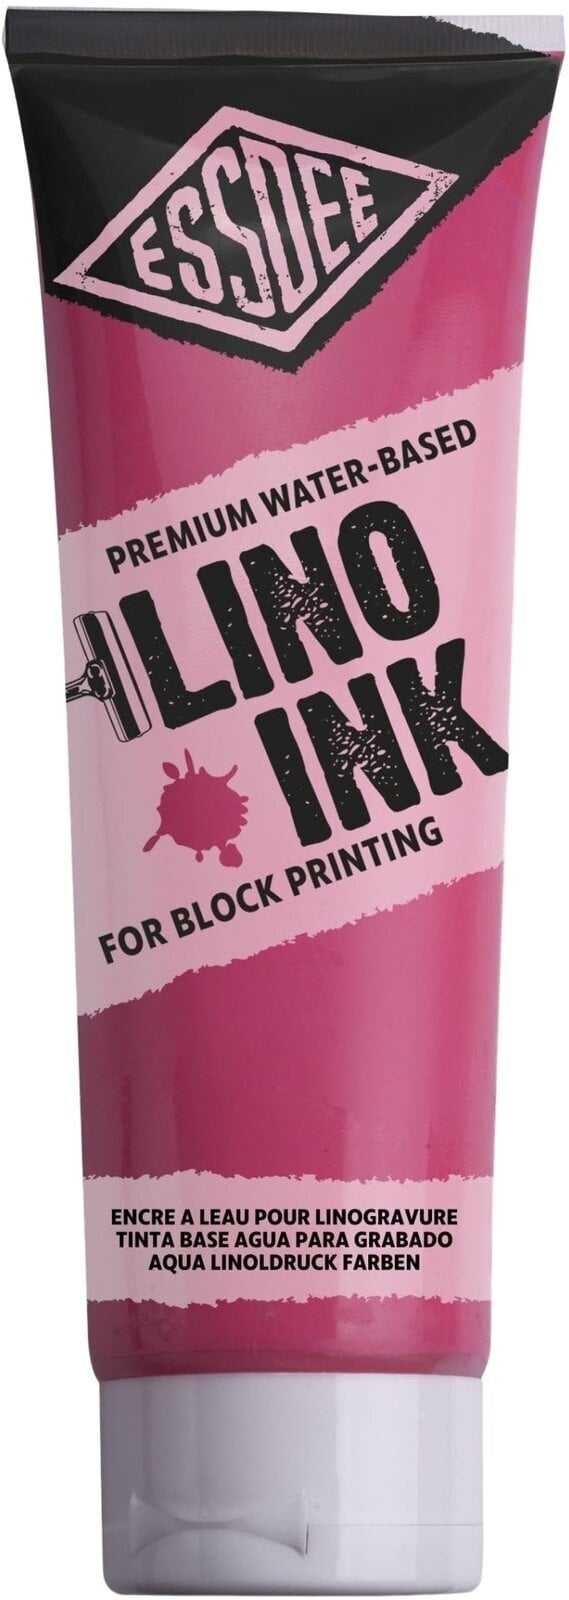 Paint For Linocut Essdee Block Printing Ink Paint For Linocut Fluorescent Red 300 ml